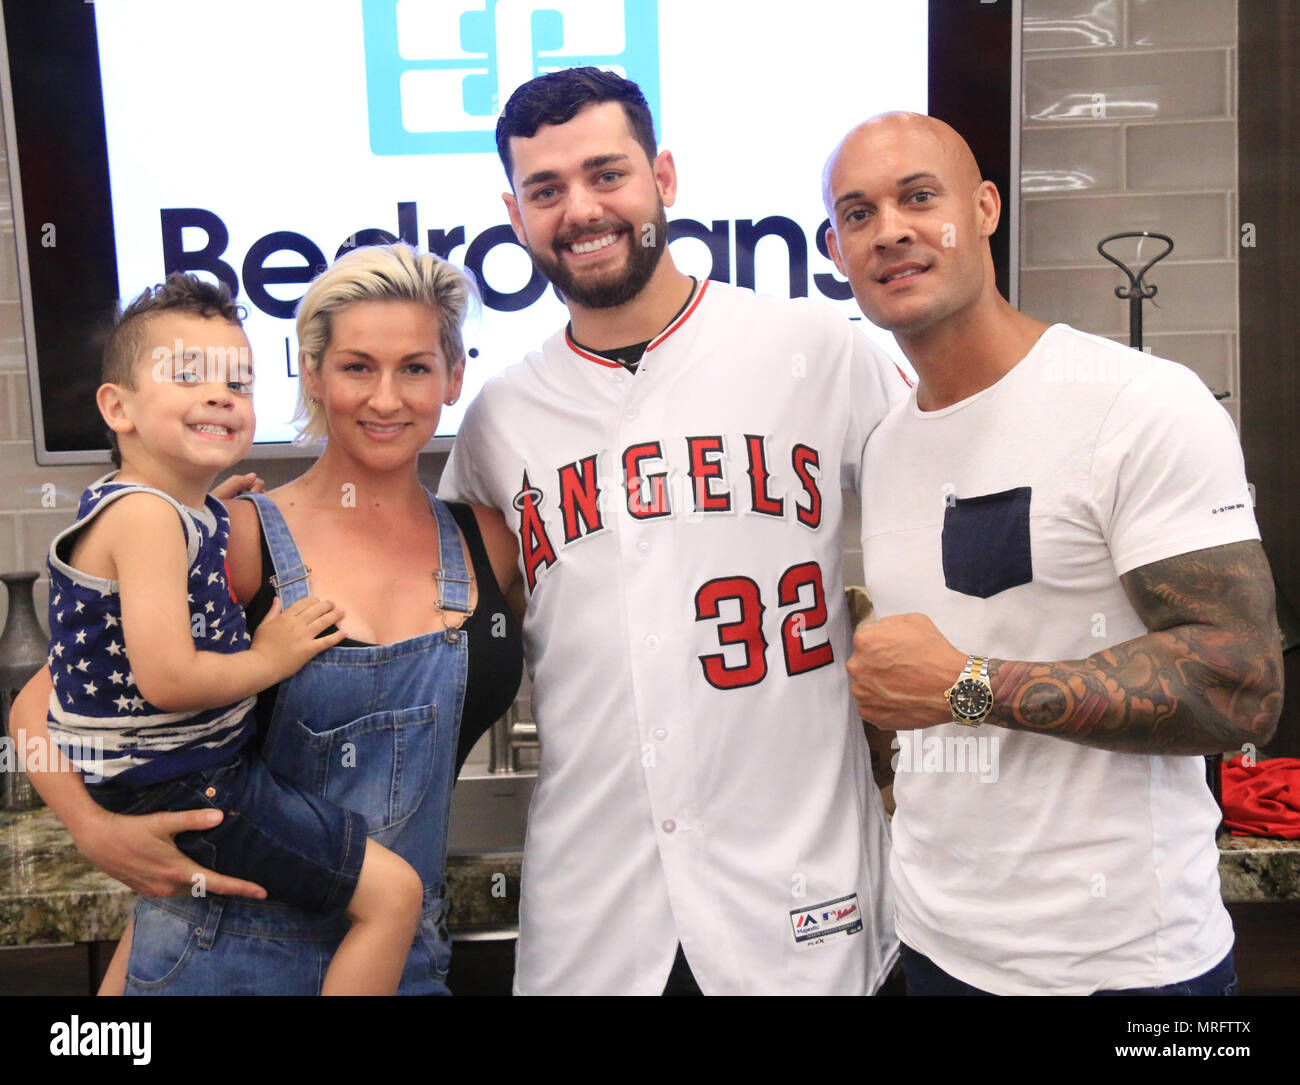 Bedrosians' 70th Anniversary Celebration With Autograph Signing by Angels  Pitcher Cam Bedrosian Featuring: Jeannie Orosco, Cam